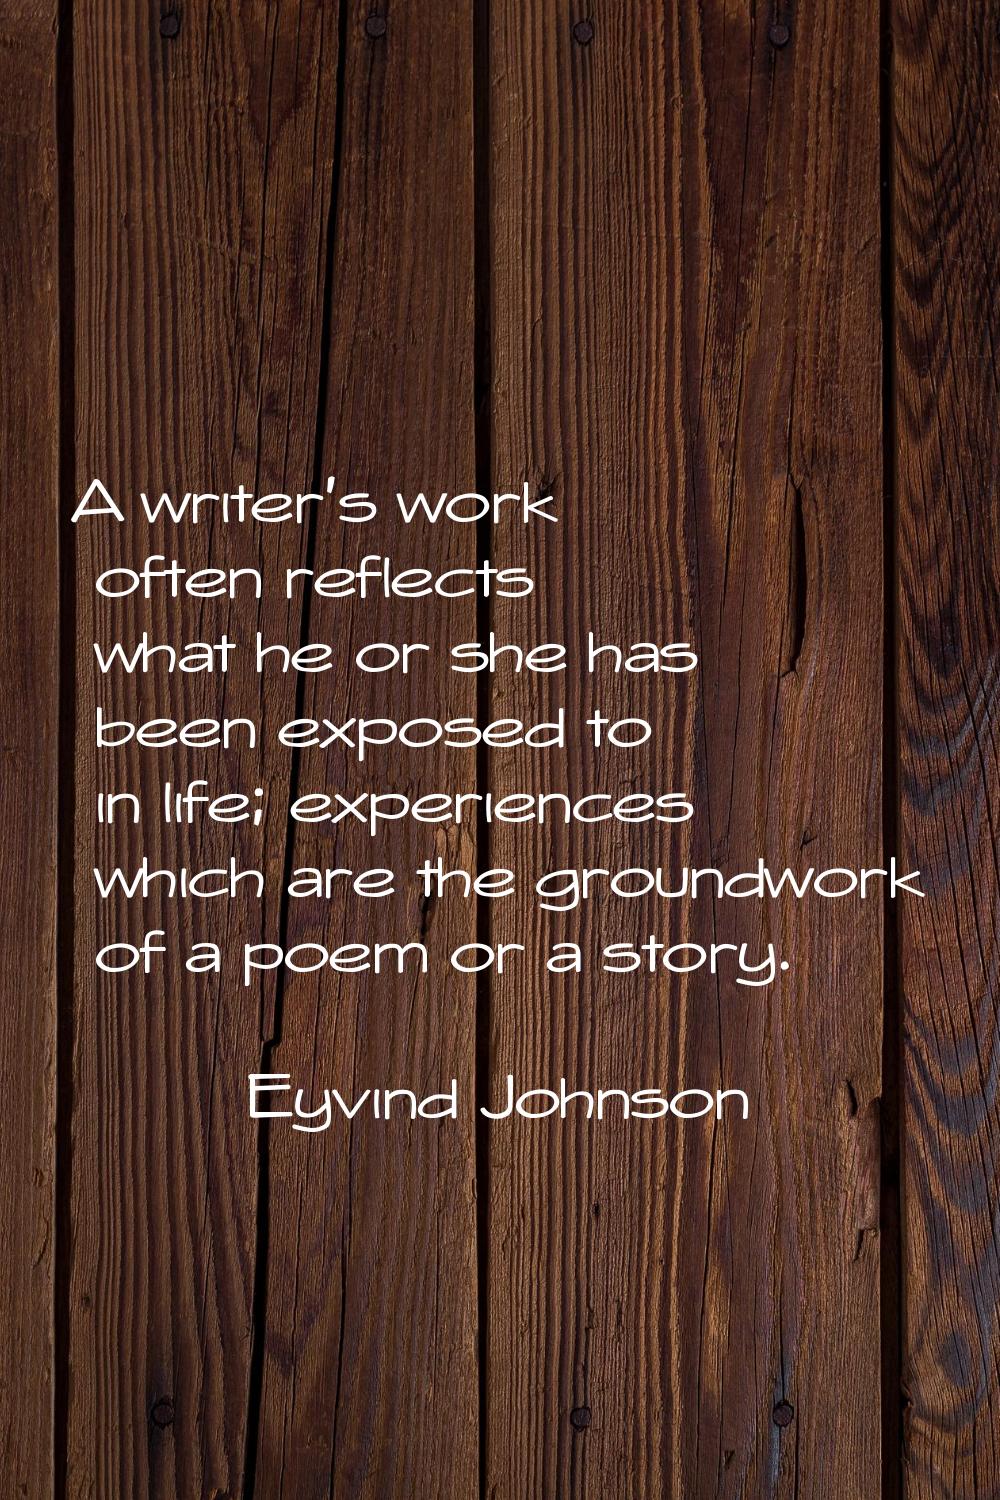 A writer's work often reflects what he or she has been exposed to in life; experiences which are th